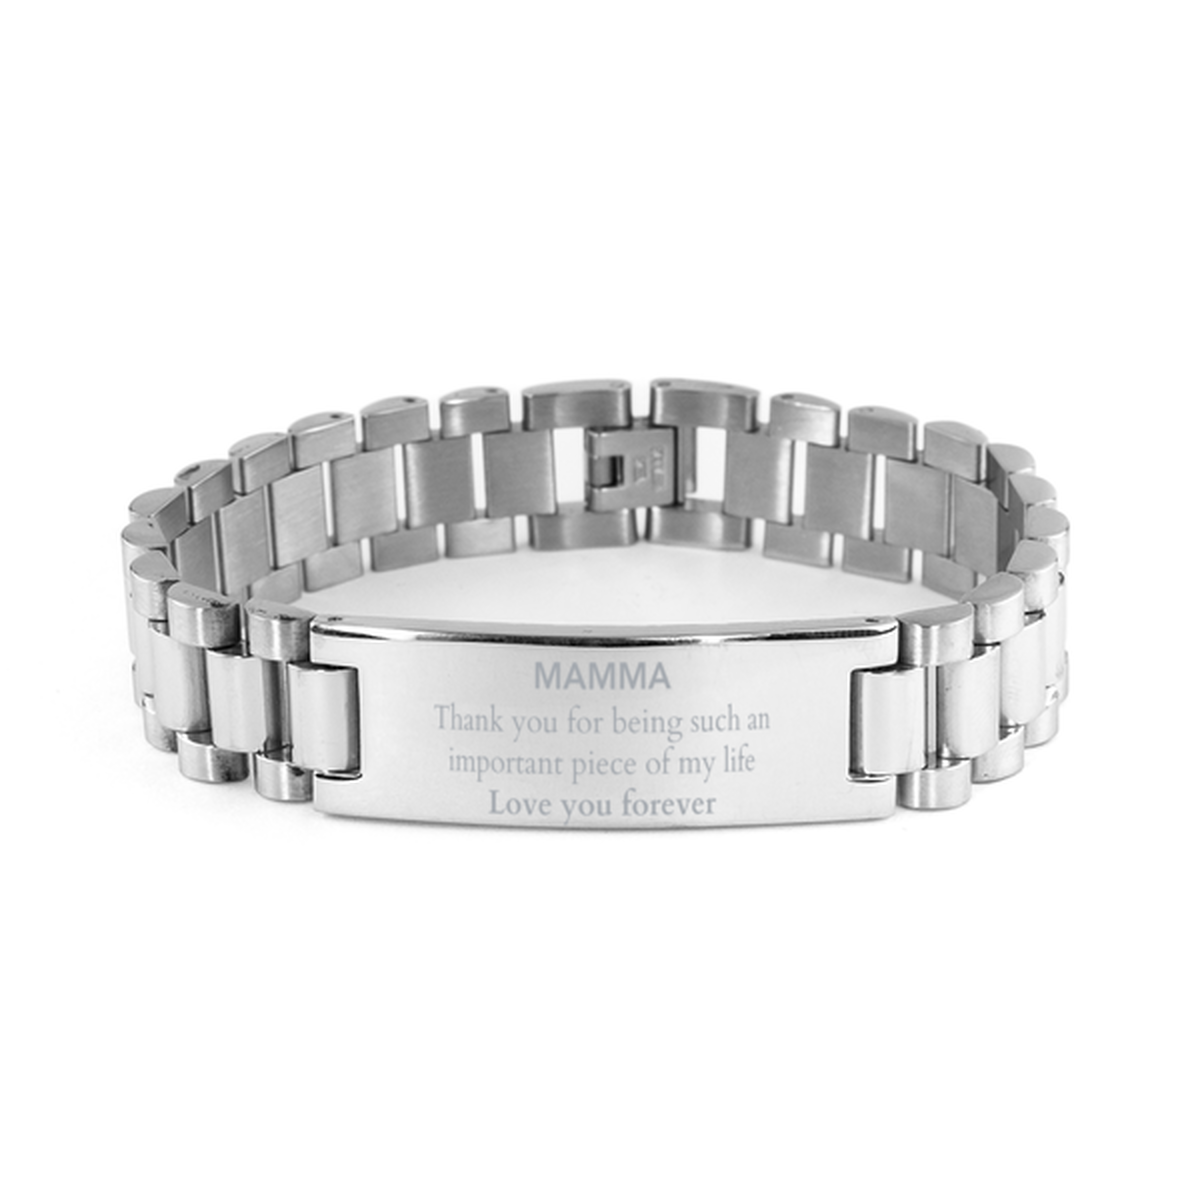 Appropriate Mamma Ladder Stainless Steel Bracelet Epic Birthday Gifts for Mamma Thank you for being such an important piece of my life Mamma Christmas Mothers Fathers Day